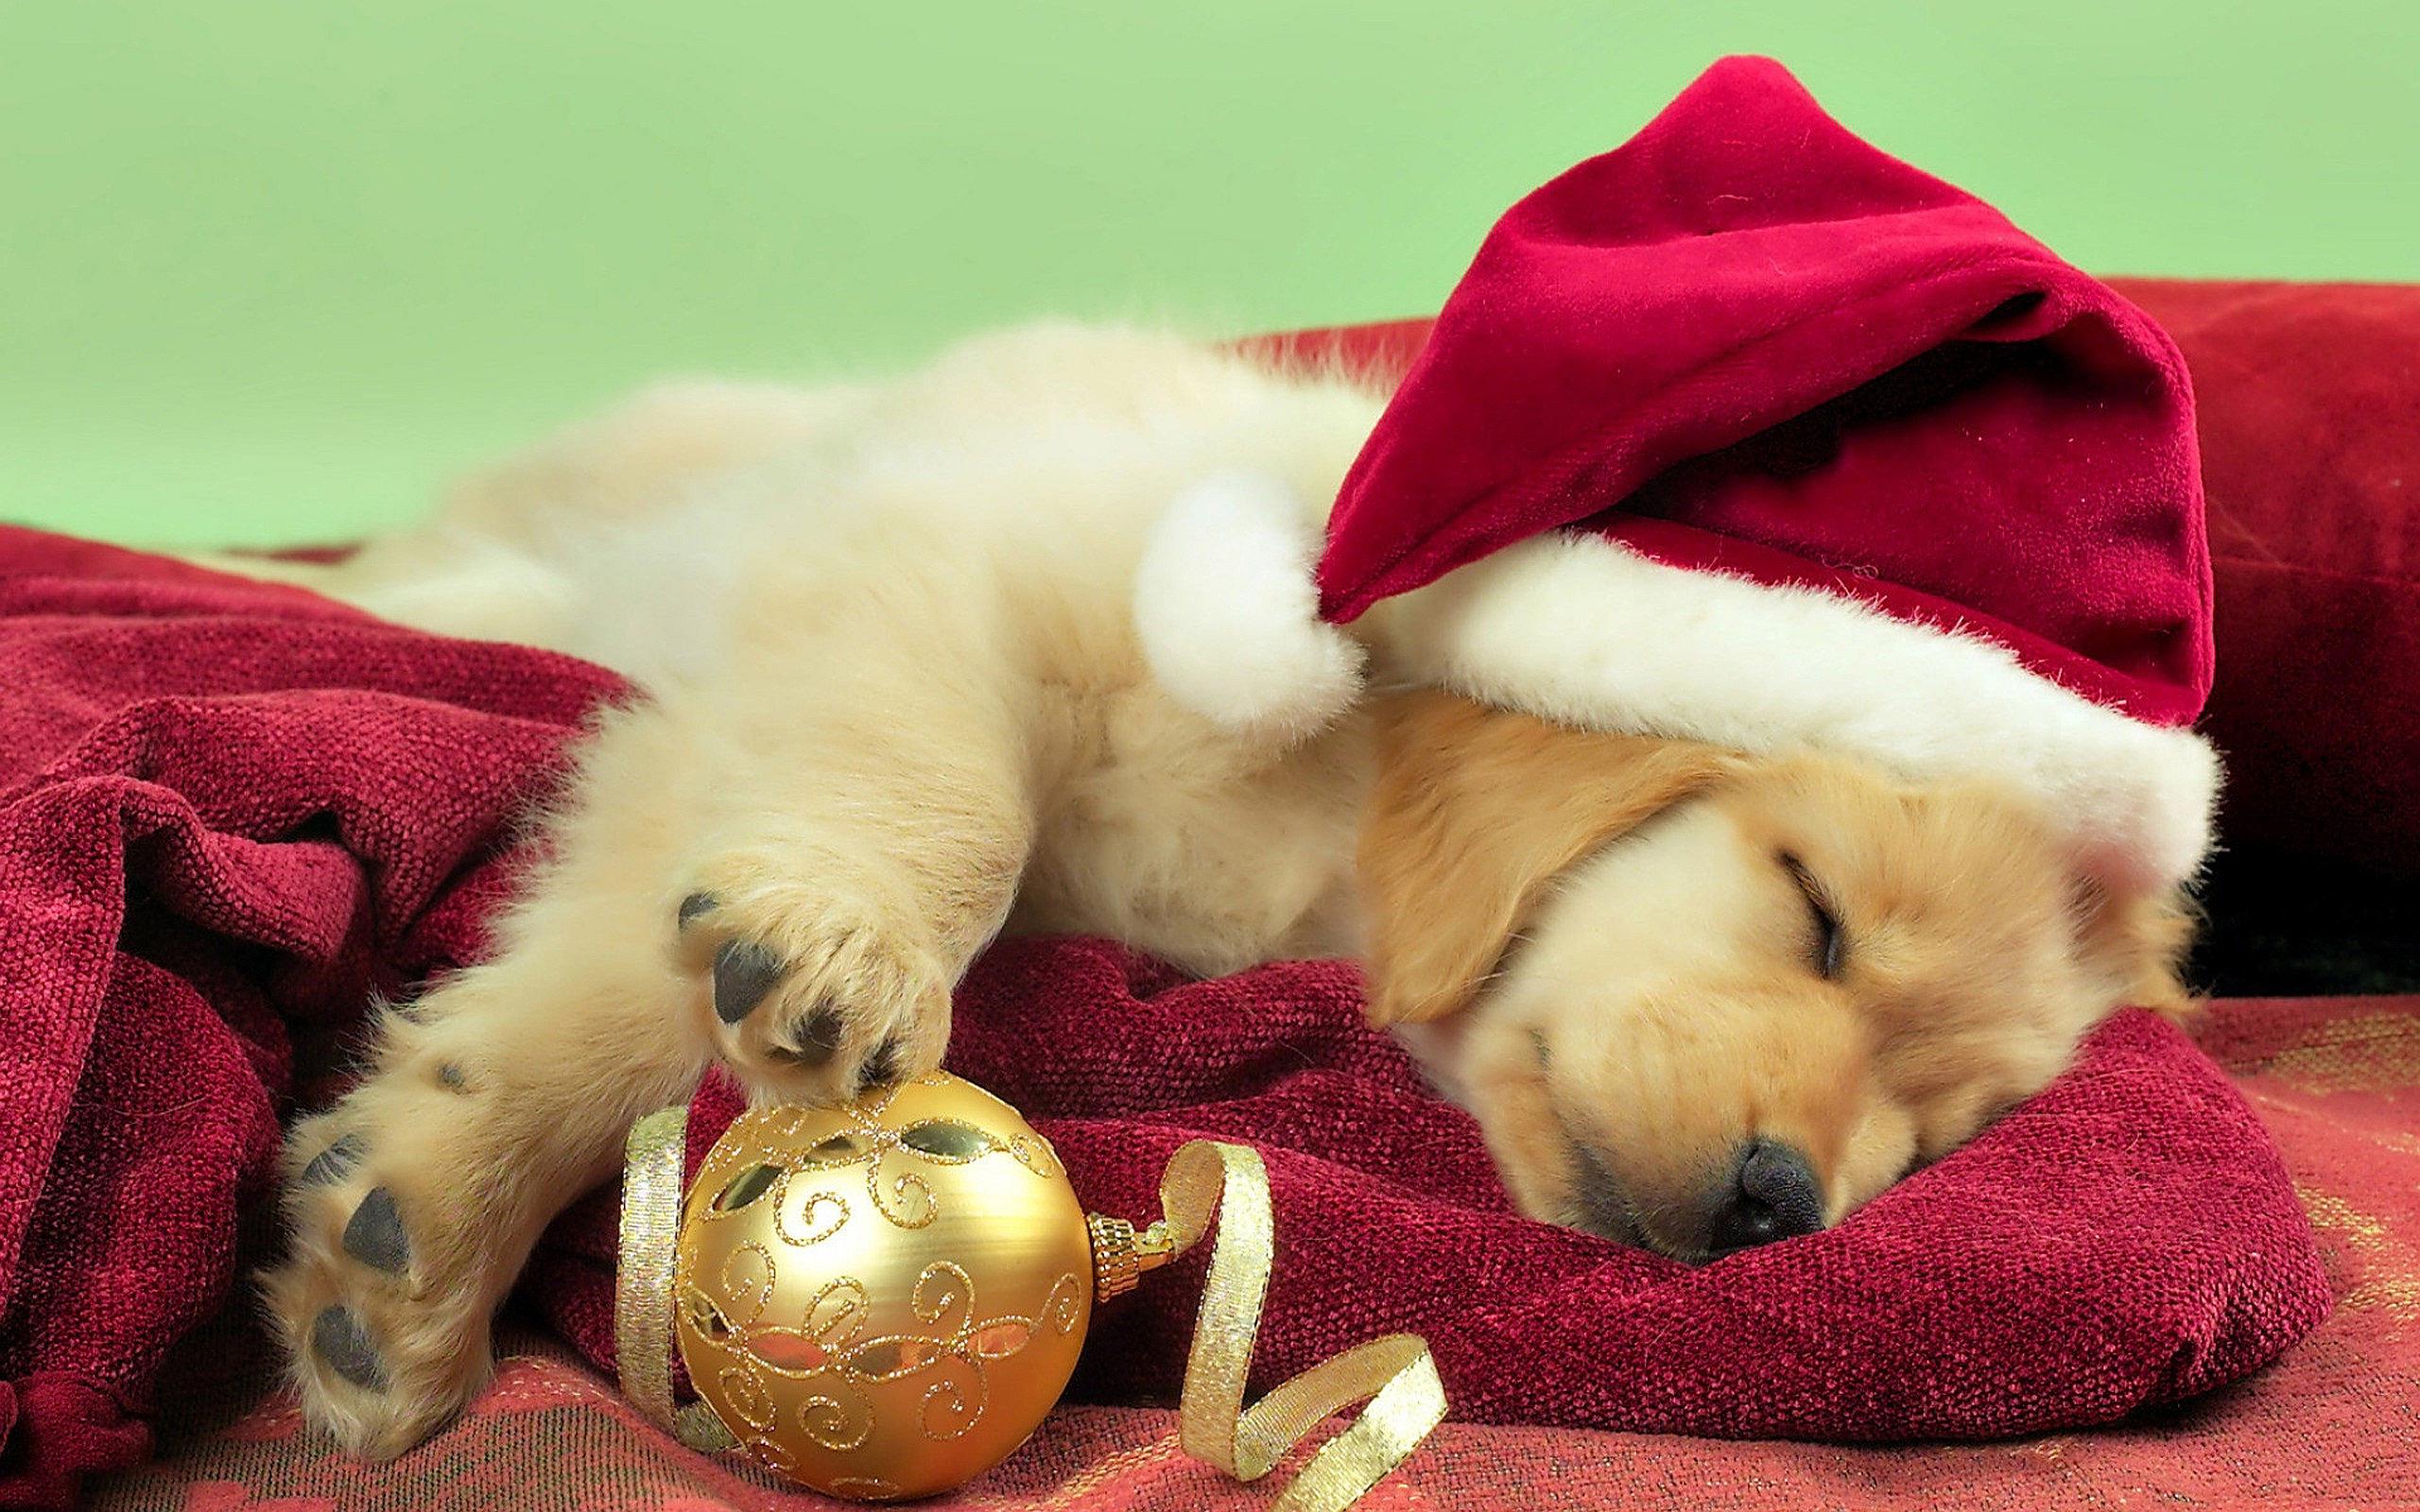 Is Christmas the Best Time for a New Dog? Million Dogs